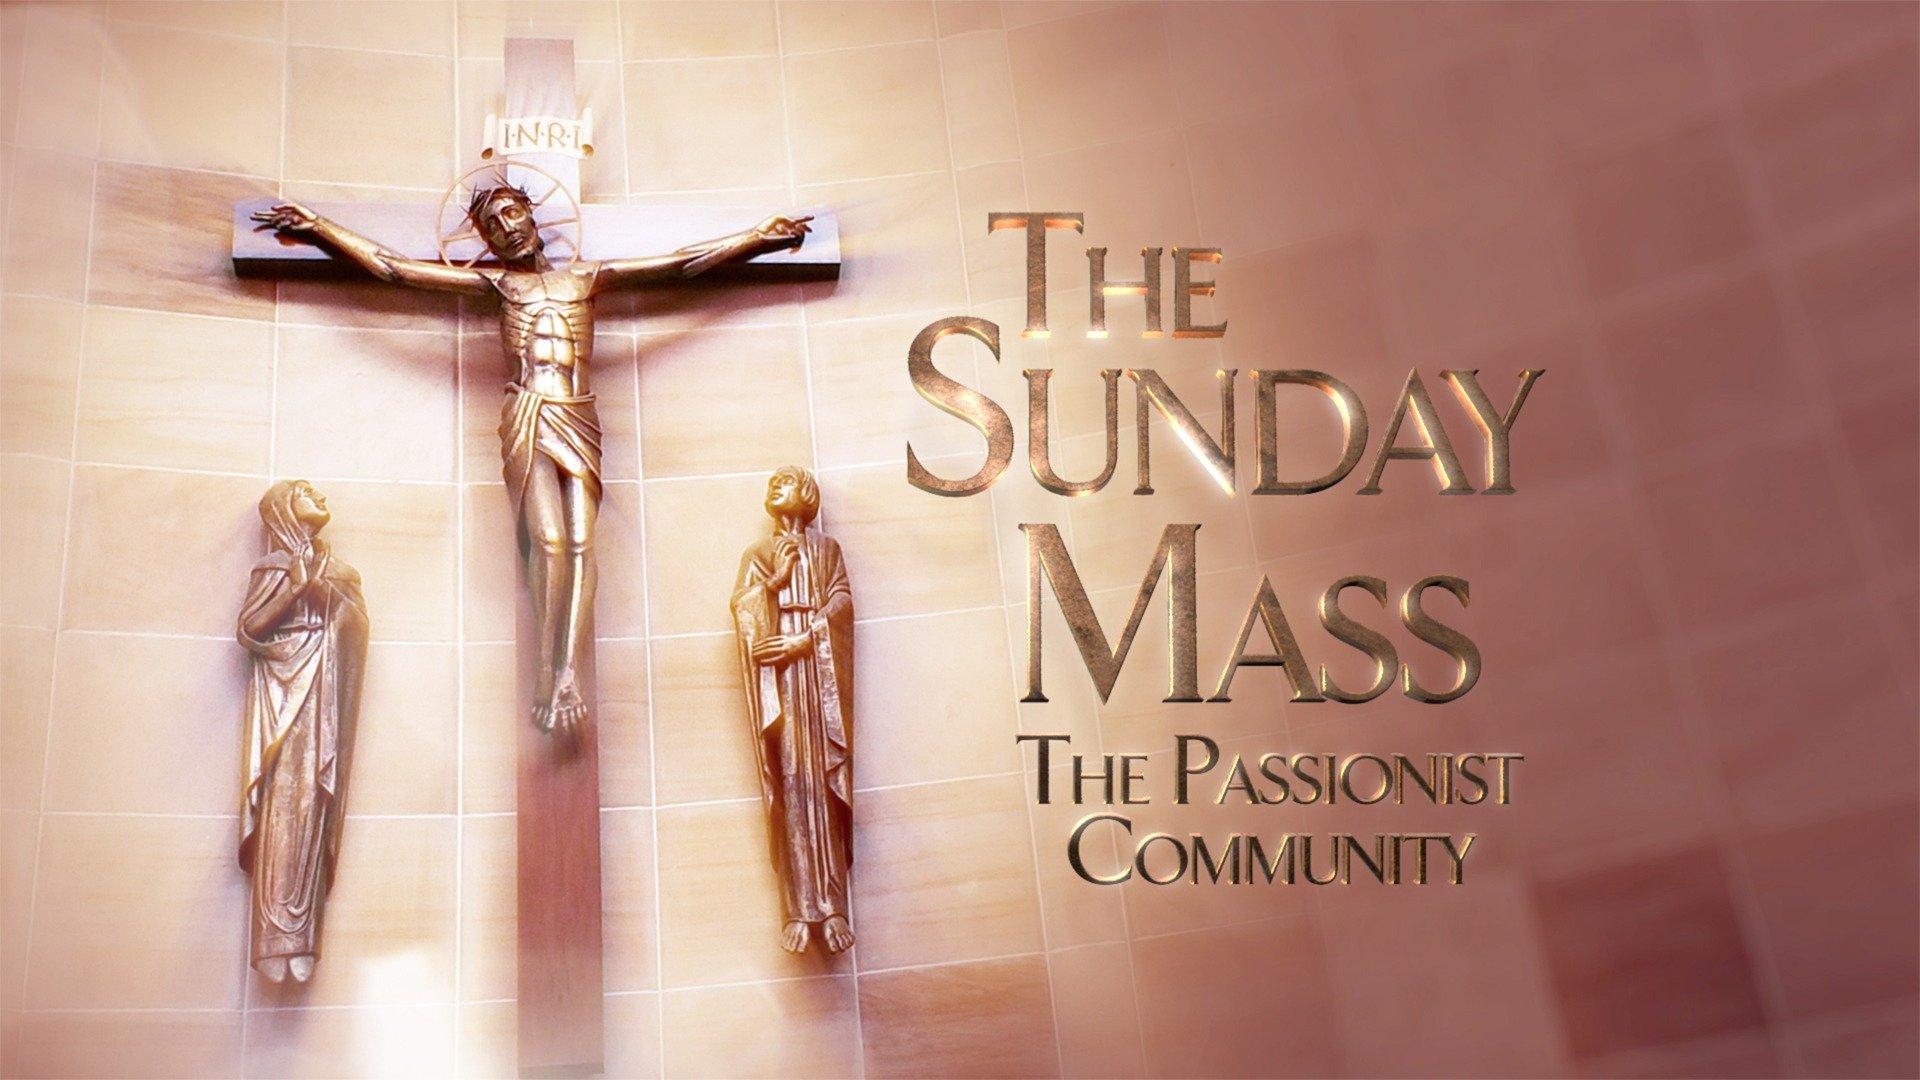 Watch The Sunday Mass Streaming Online on Philo (Free Trial)